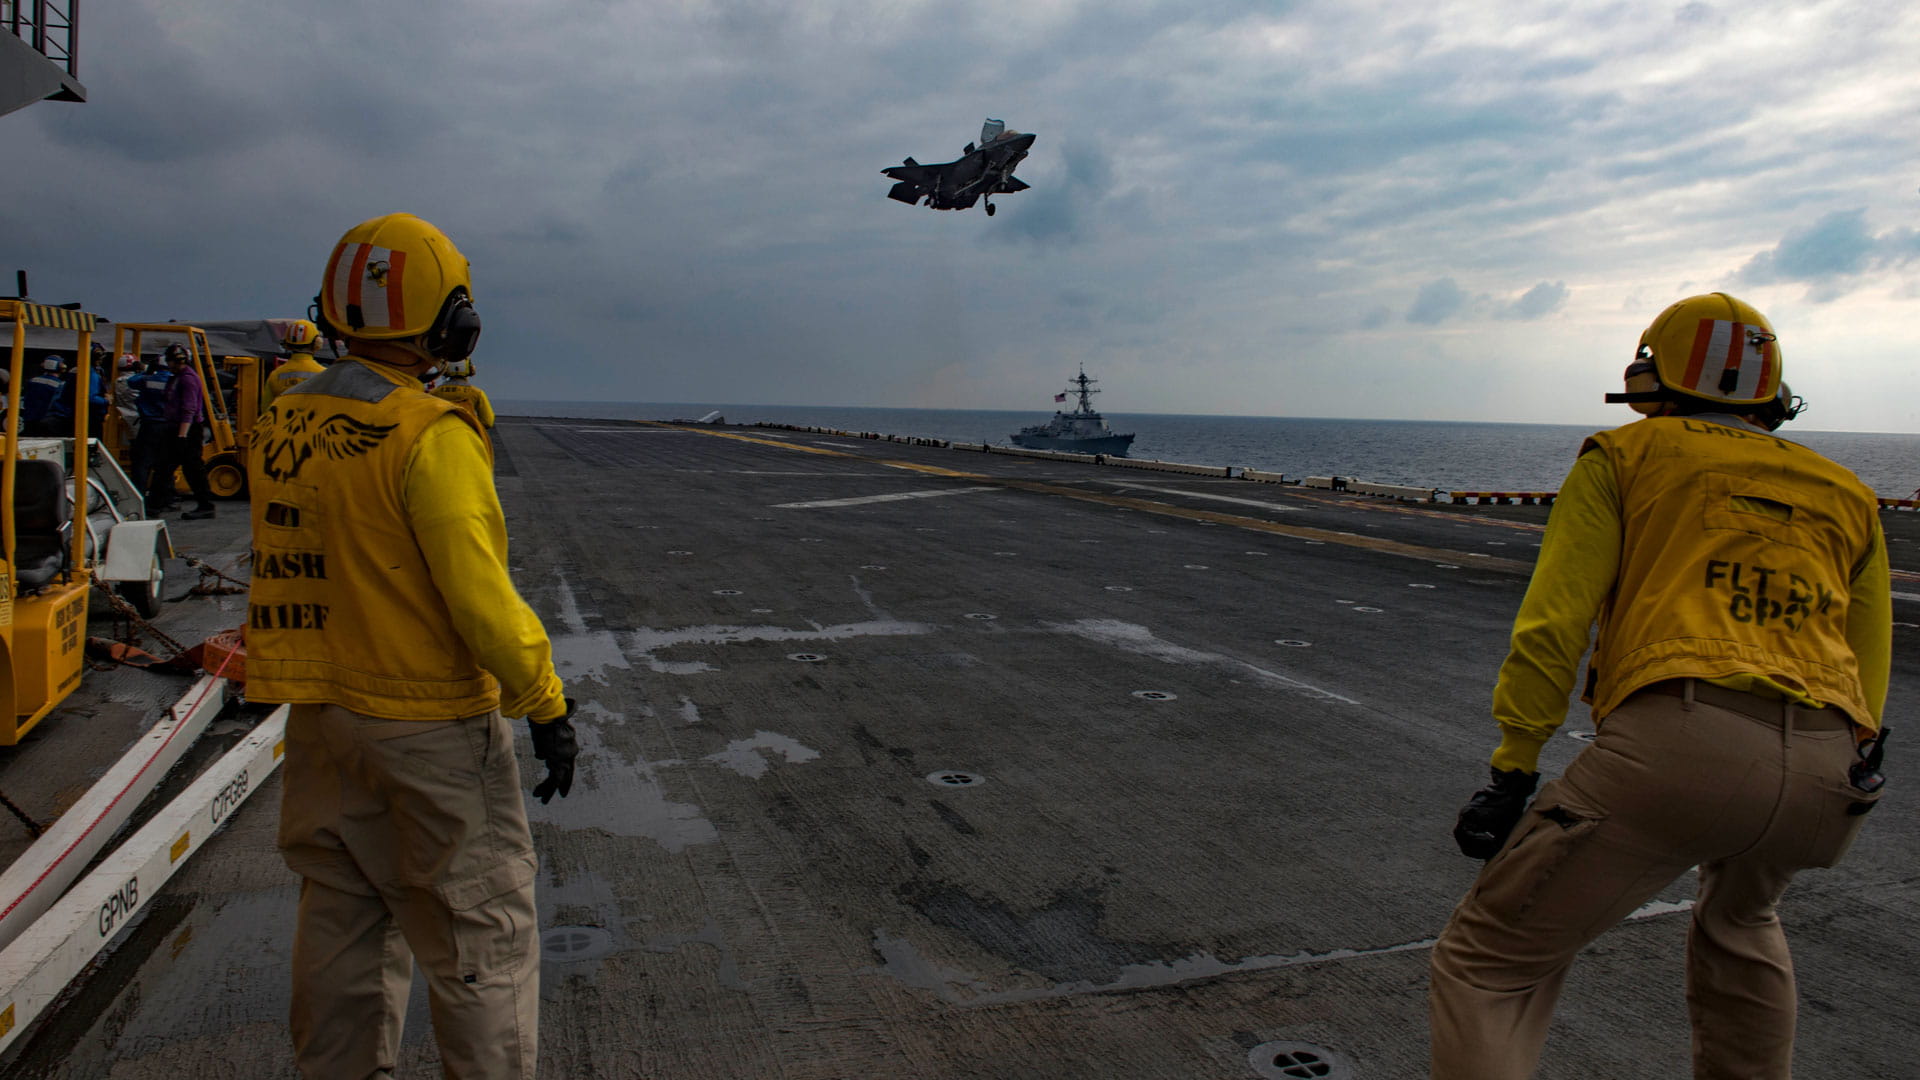 An F-35B Lightning II assigned to Marine Fighter Attack Squadron (VFMA) 121 takes off from the amphibious assault ship USS Wasp (LHD 1) following an expeditionary strike exercise in the Philippines on April 18, 2018. Photo by Mass Communication Specialist 1st Class Jessica Bidwell/Released